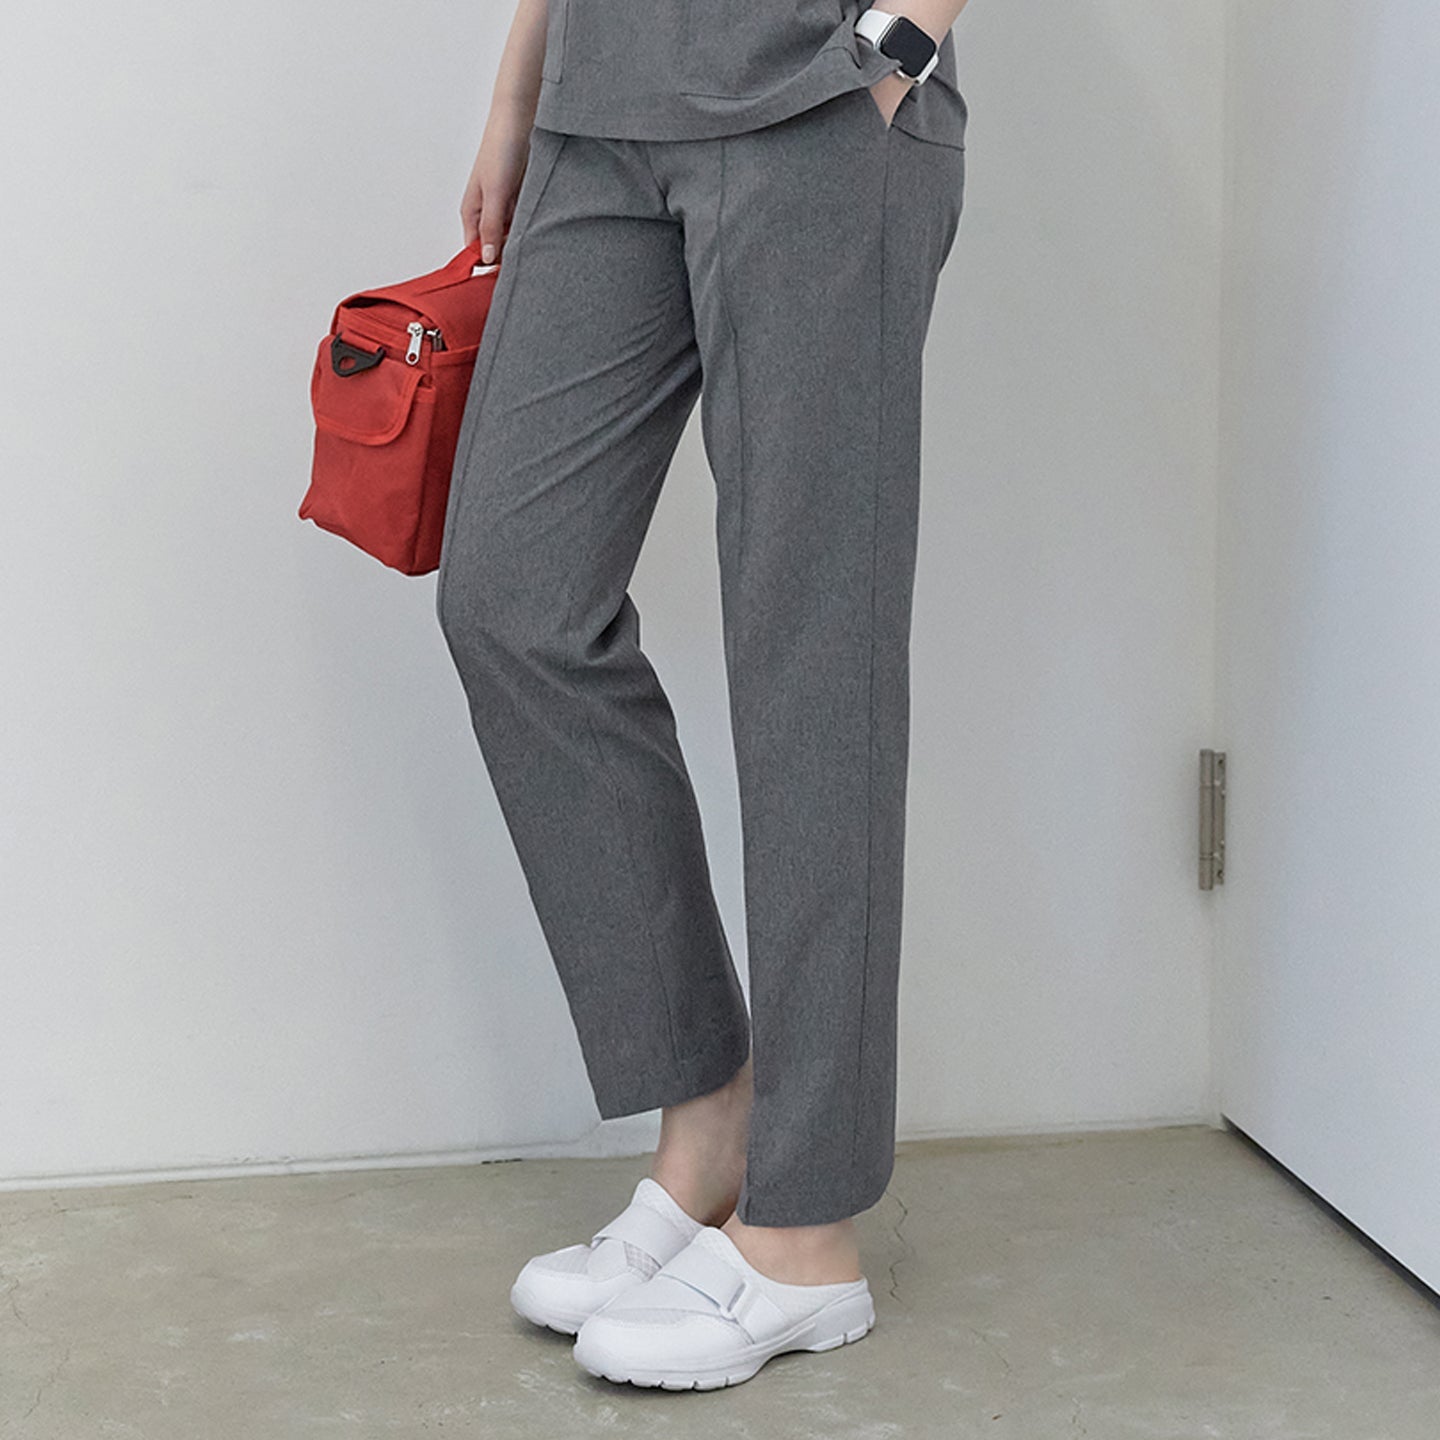 A woman holding a red bag, wearing Soft Gray Line Banding Scrub Pants and a matching top, showing the half side view of the pants,Soft Gray